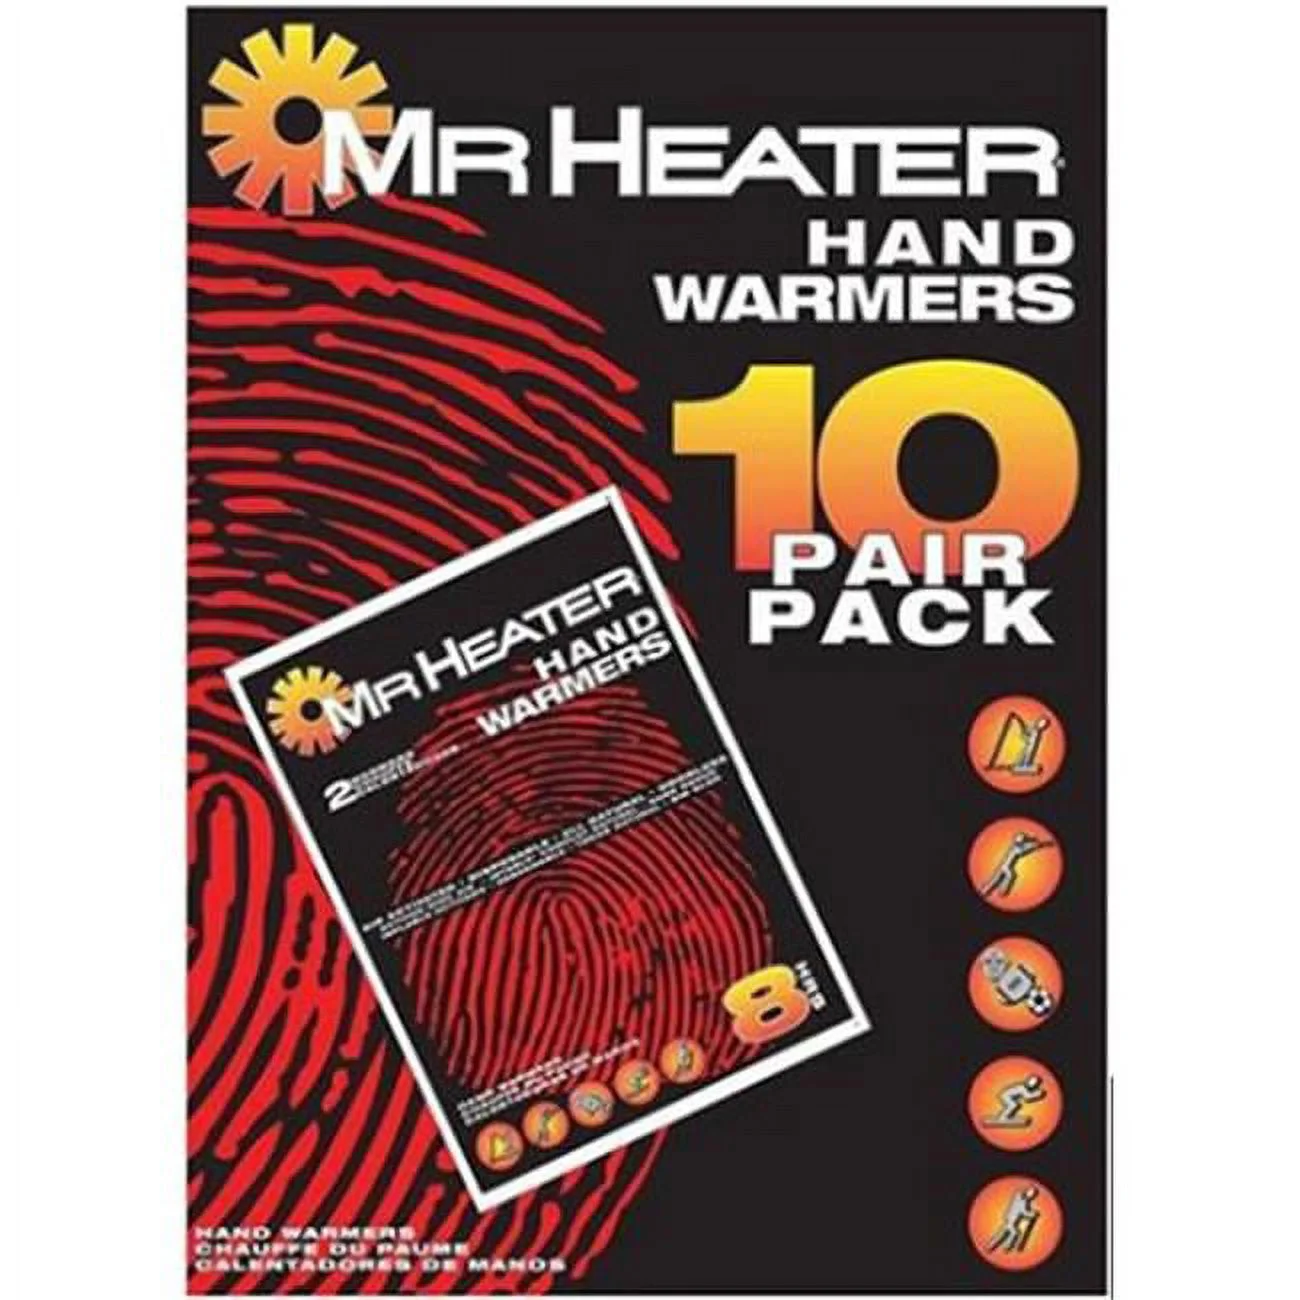 10 Pack Hand Warmers  Trombly's Tackle Box